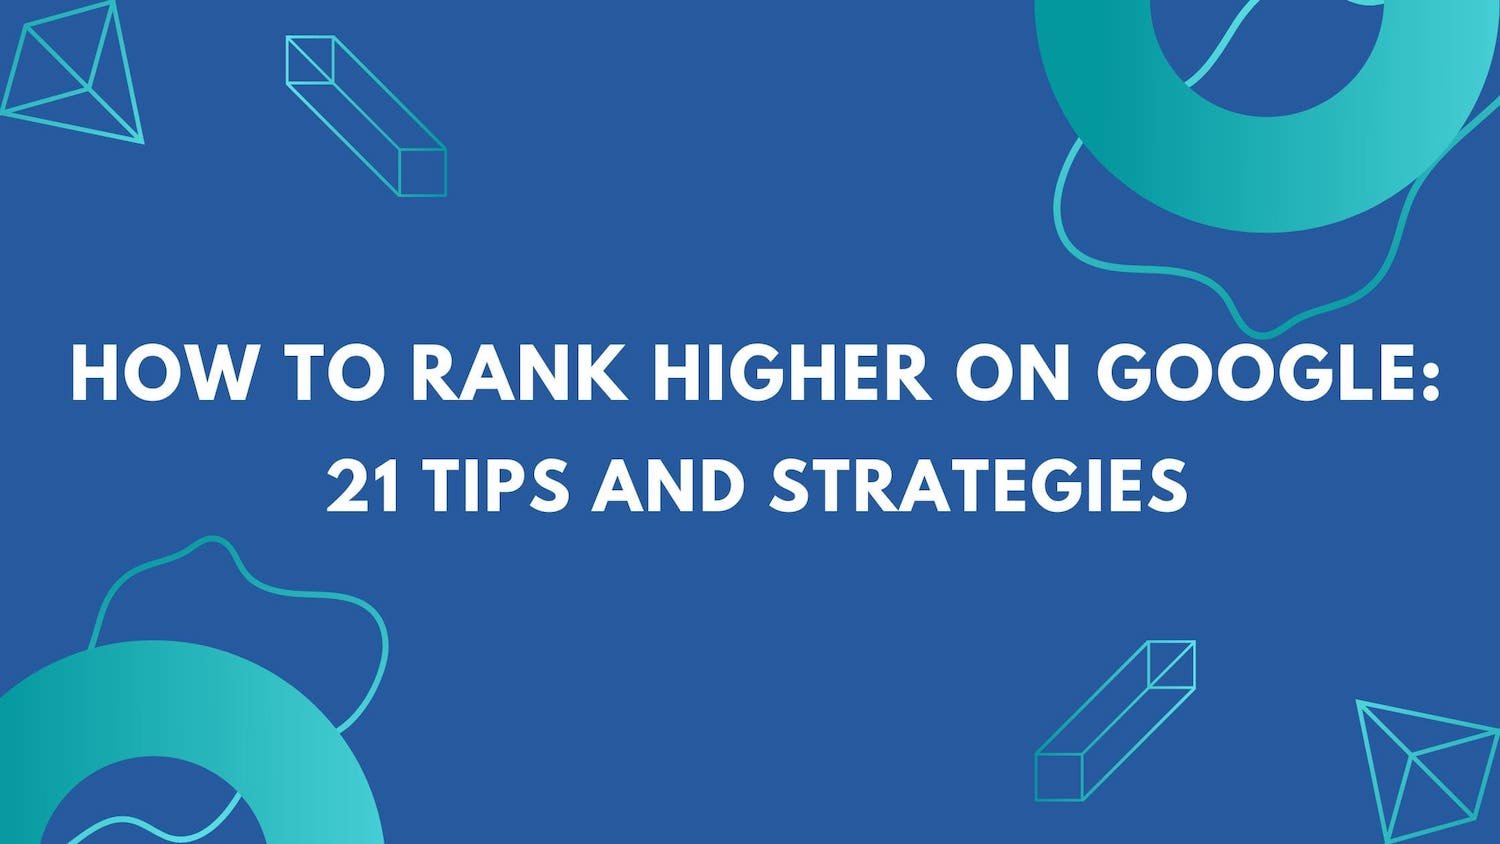 How to rank higher on Google 21 tips and strategies for 2022